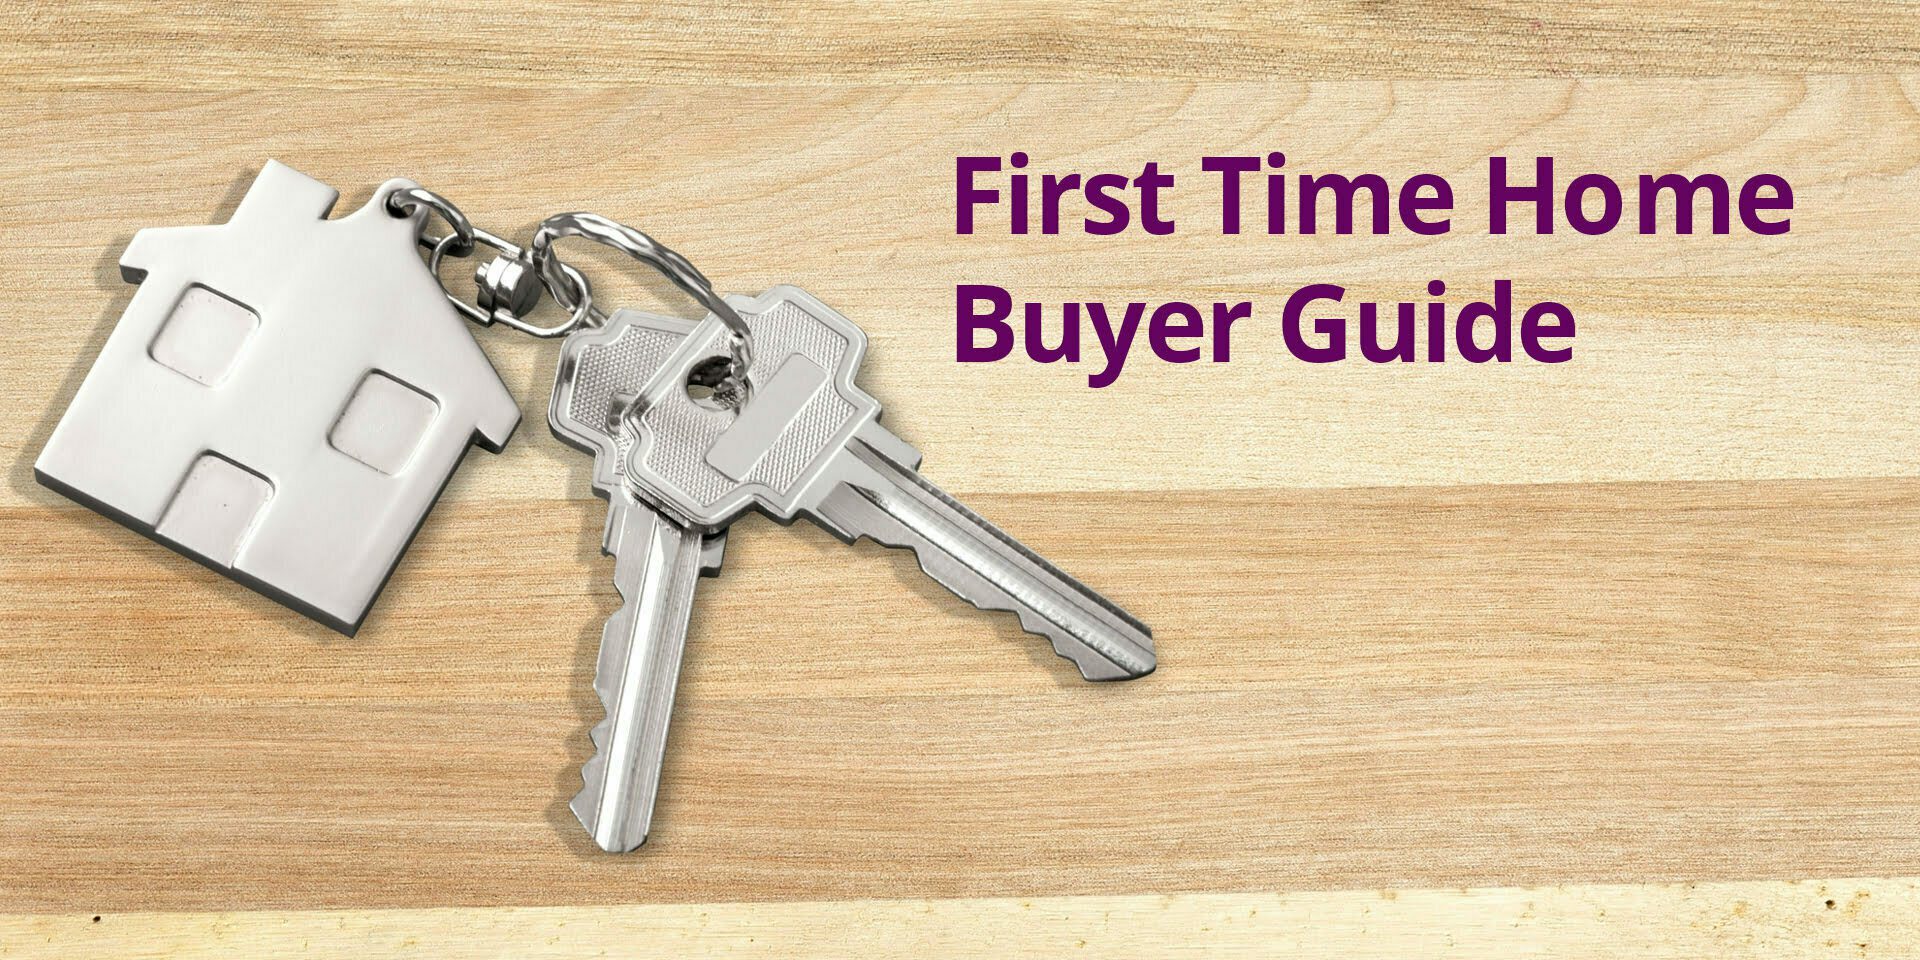 FirstTime Home Buyer Guide Everything You Need to Know